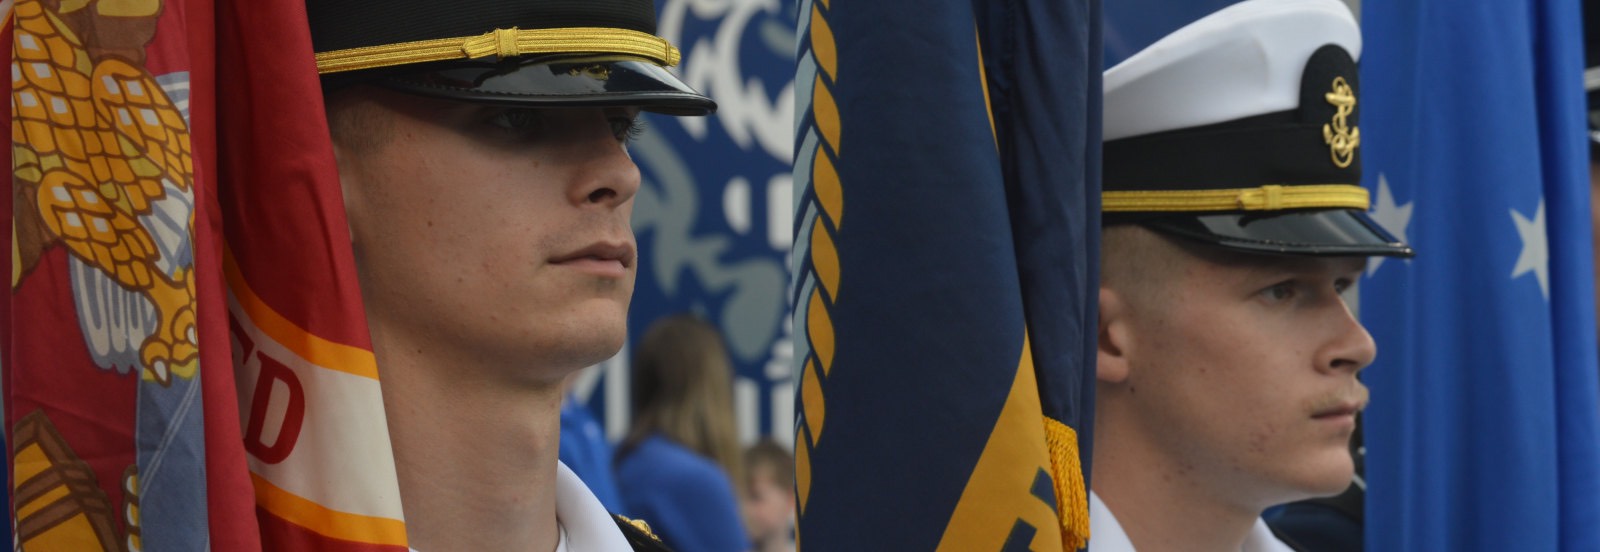 designed to prepare midshipmen for a career as future officers in the United States Navy and United States Marine Corps